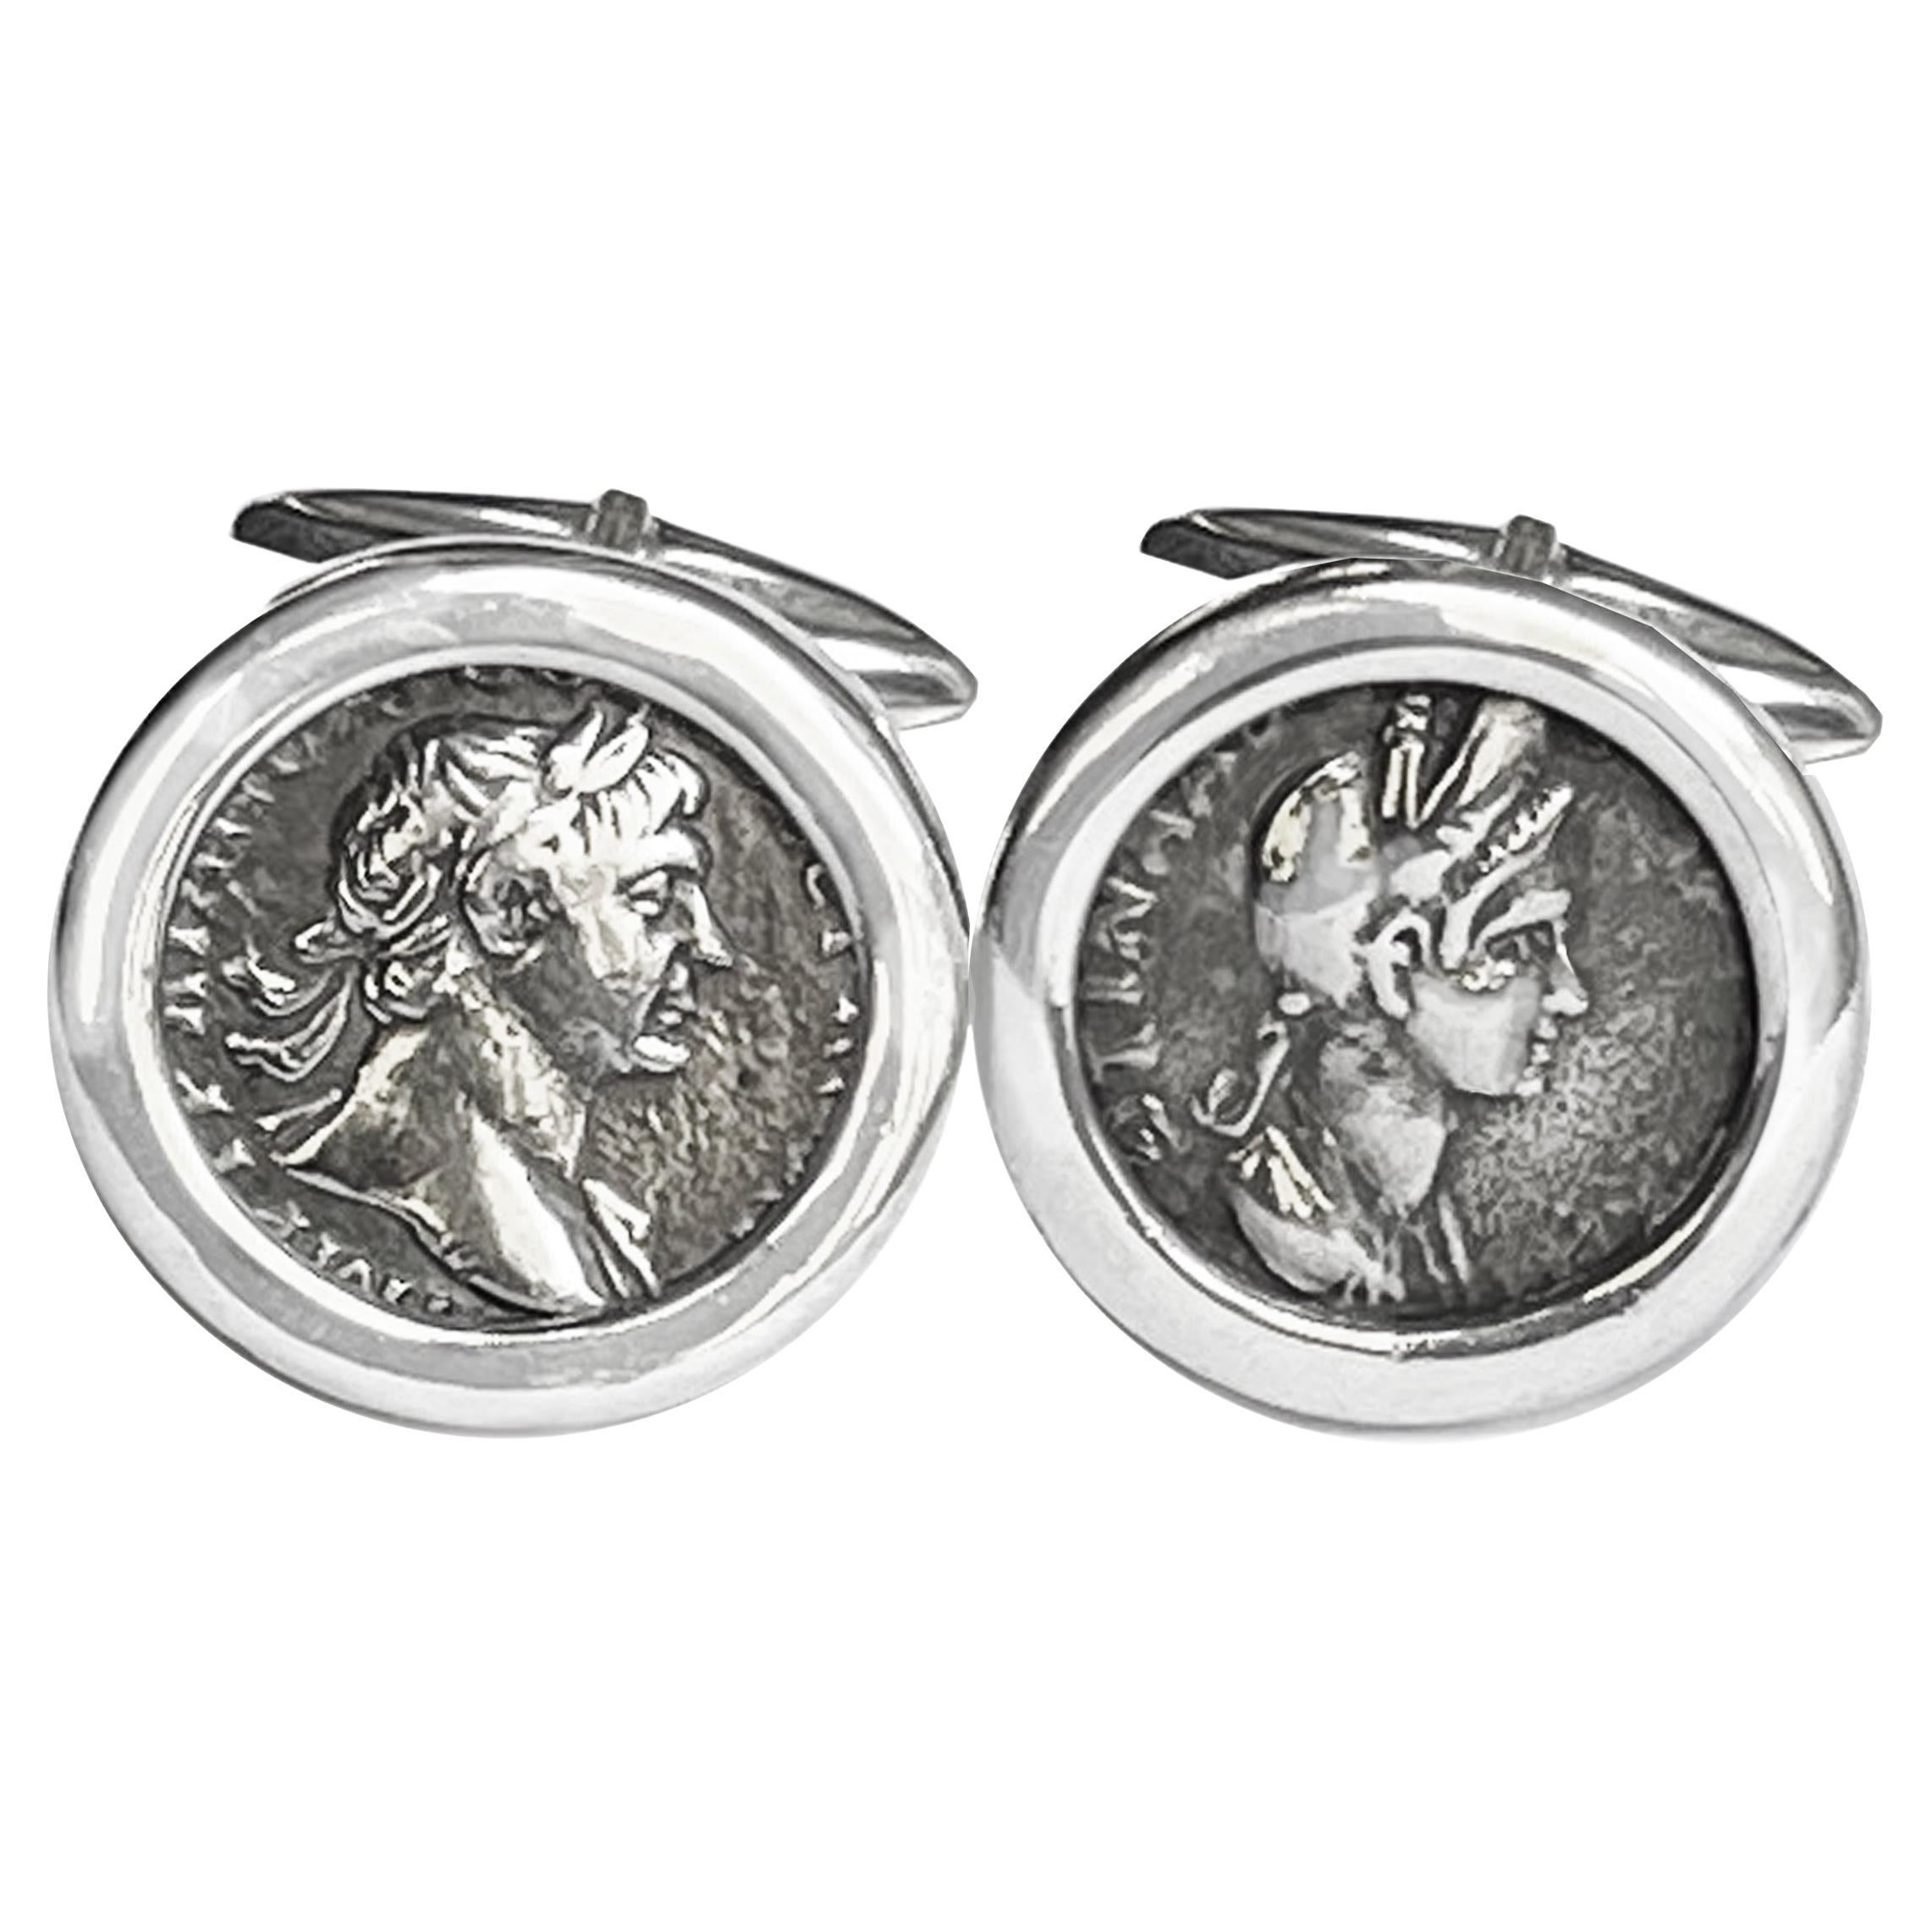 Roman Coins Cufflinks Depicting Emperor Trajan and His Wife Plotina '1 Cent.AD'